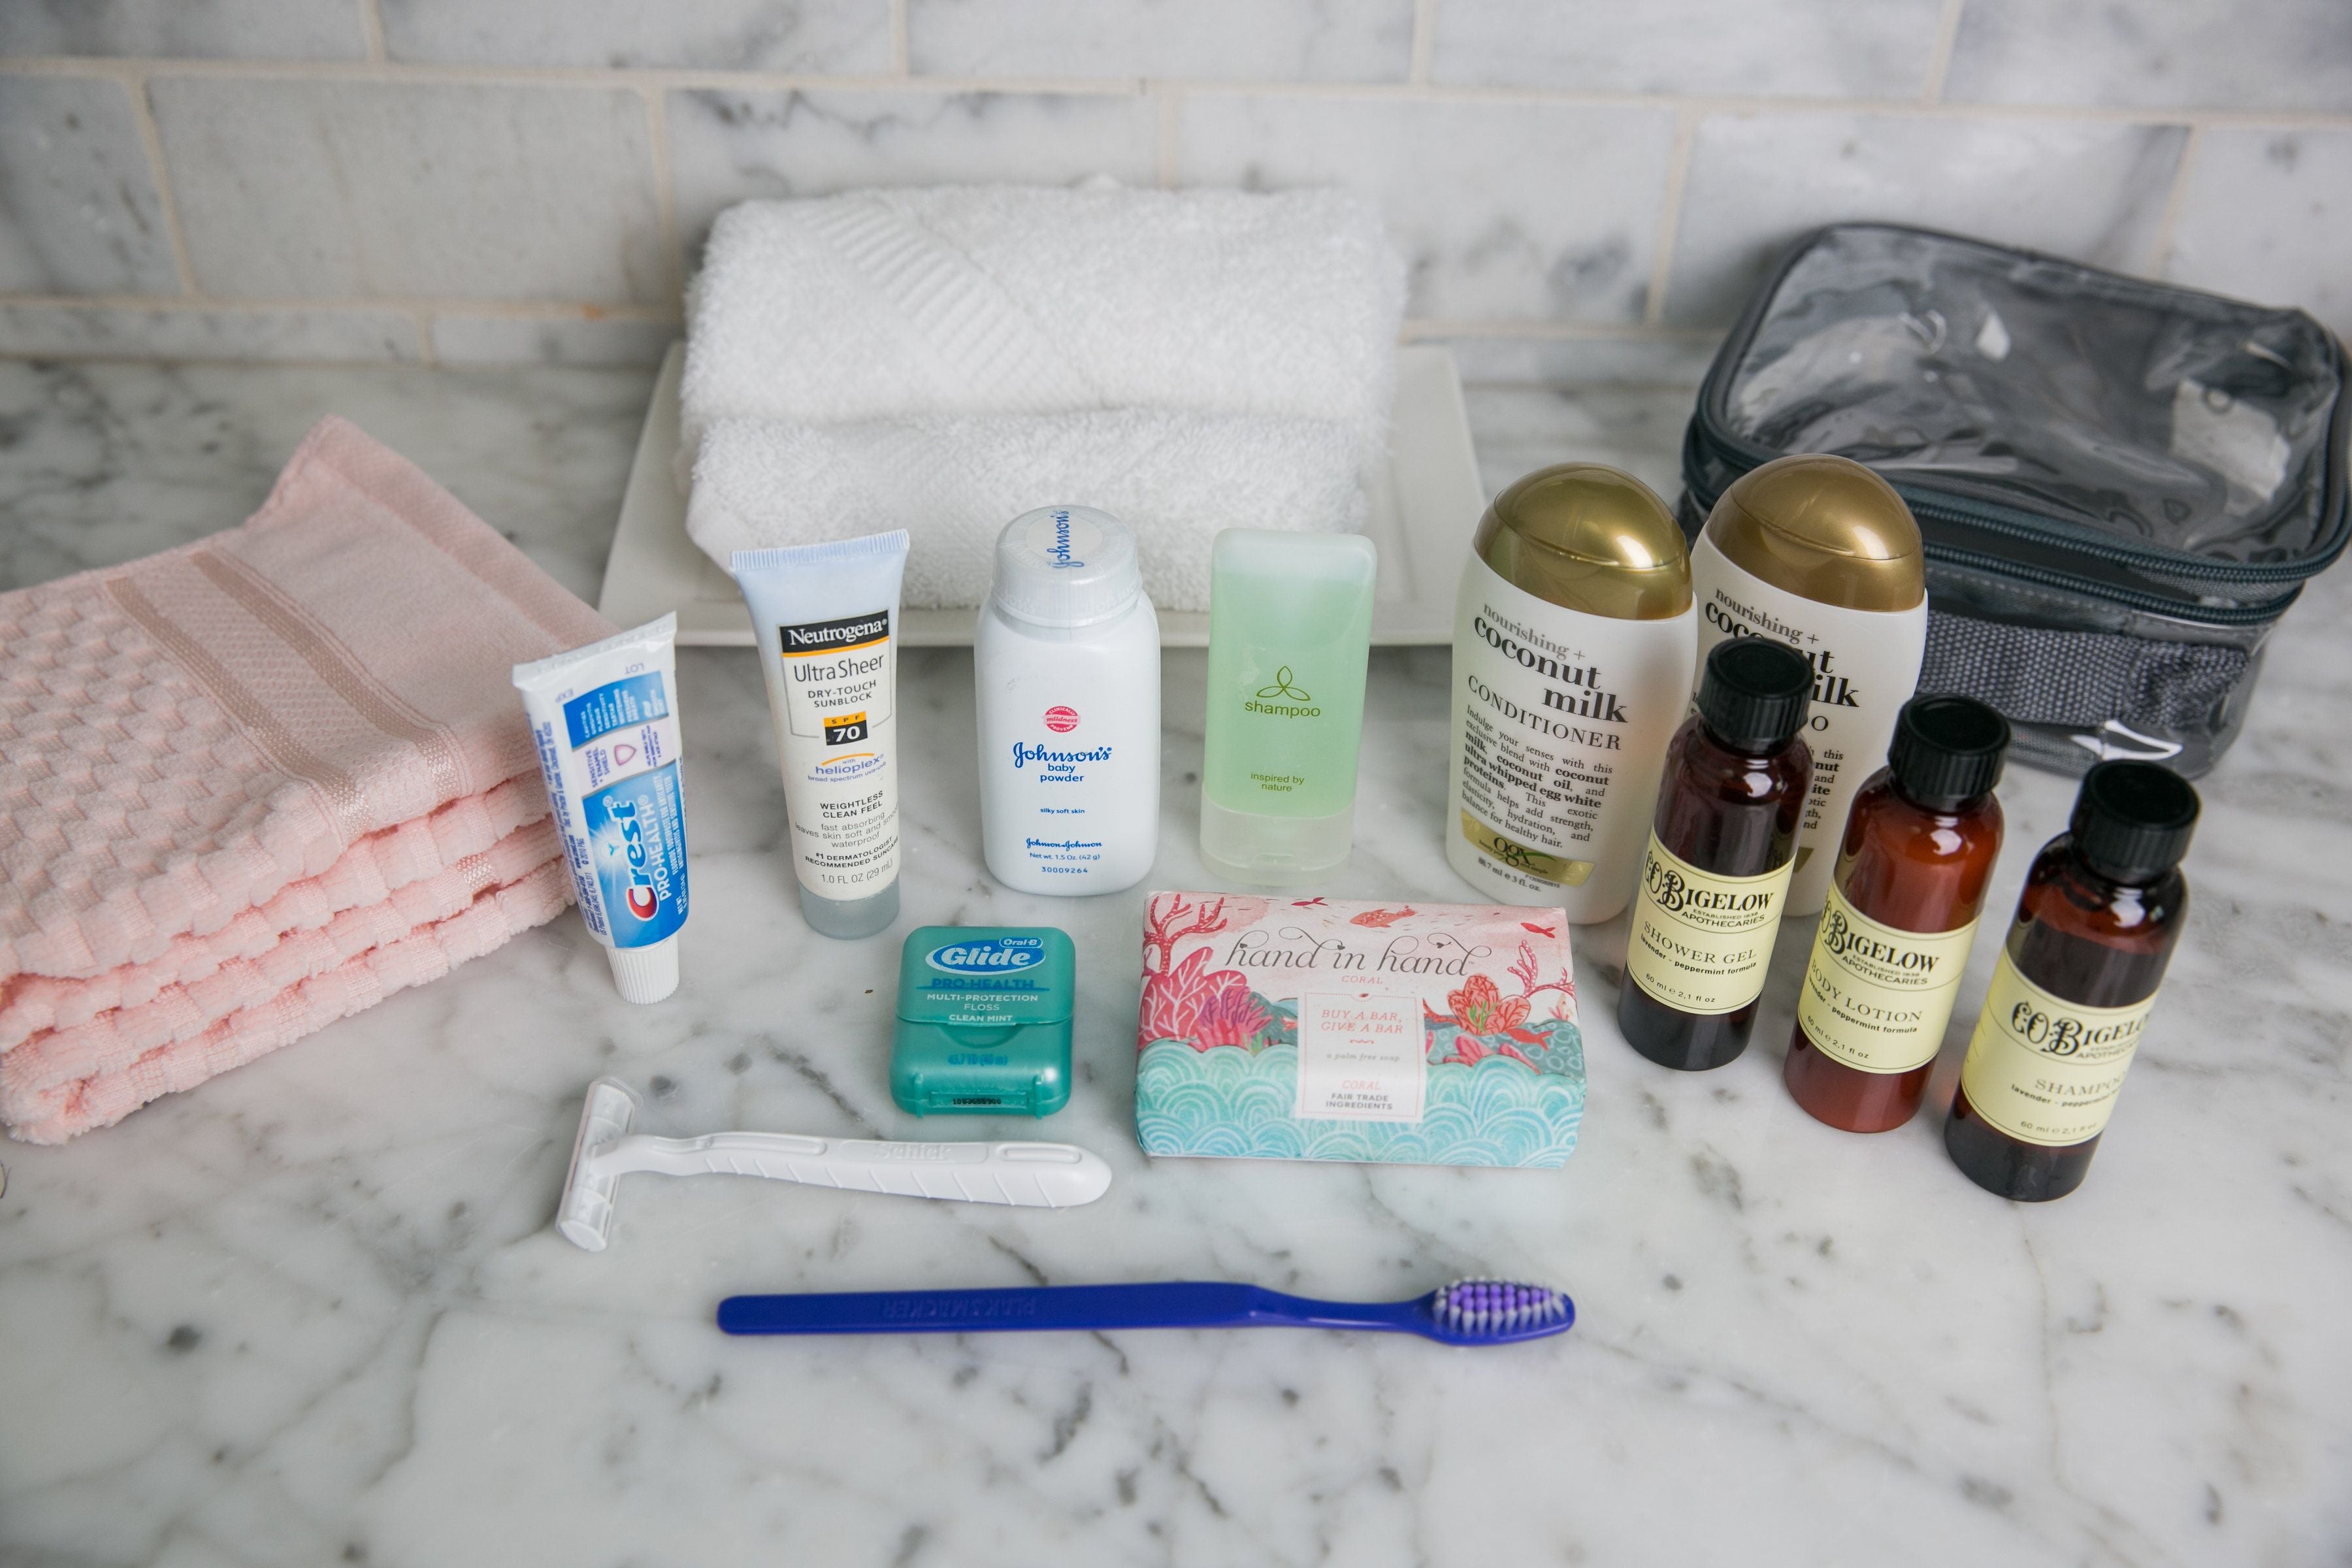 Travel size toiletries for summer trip